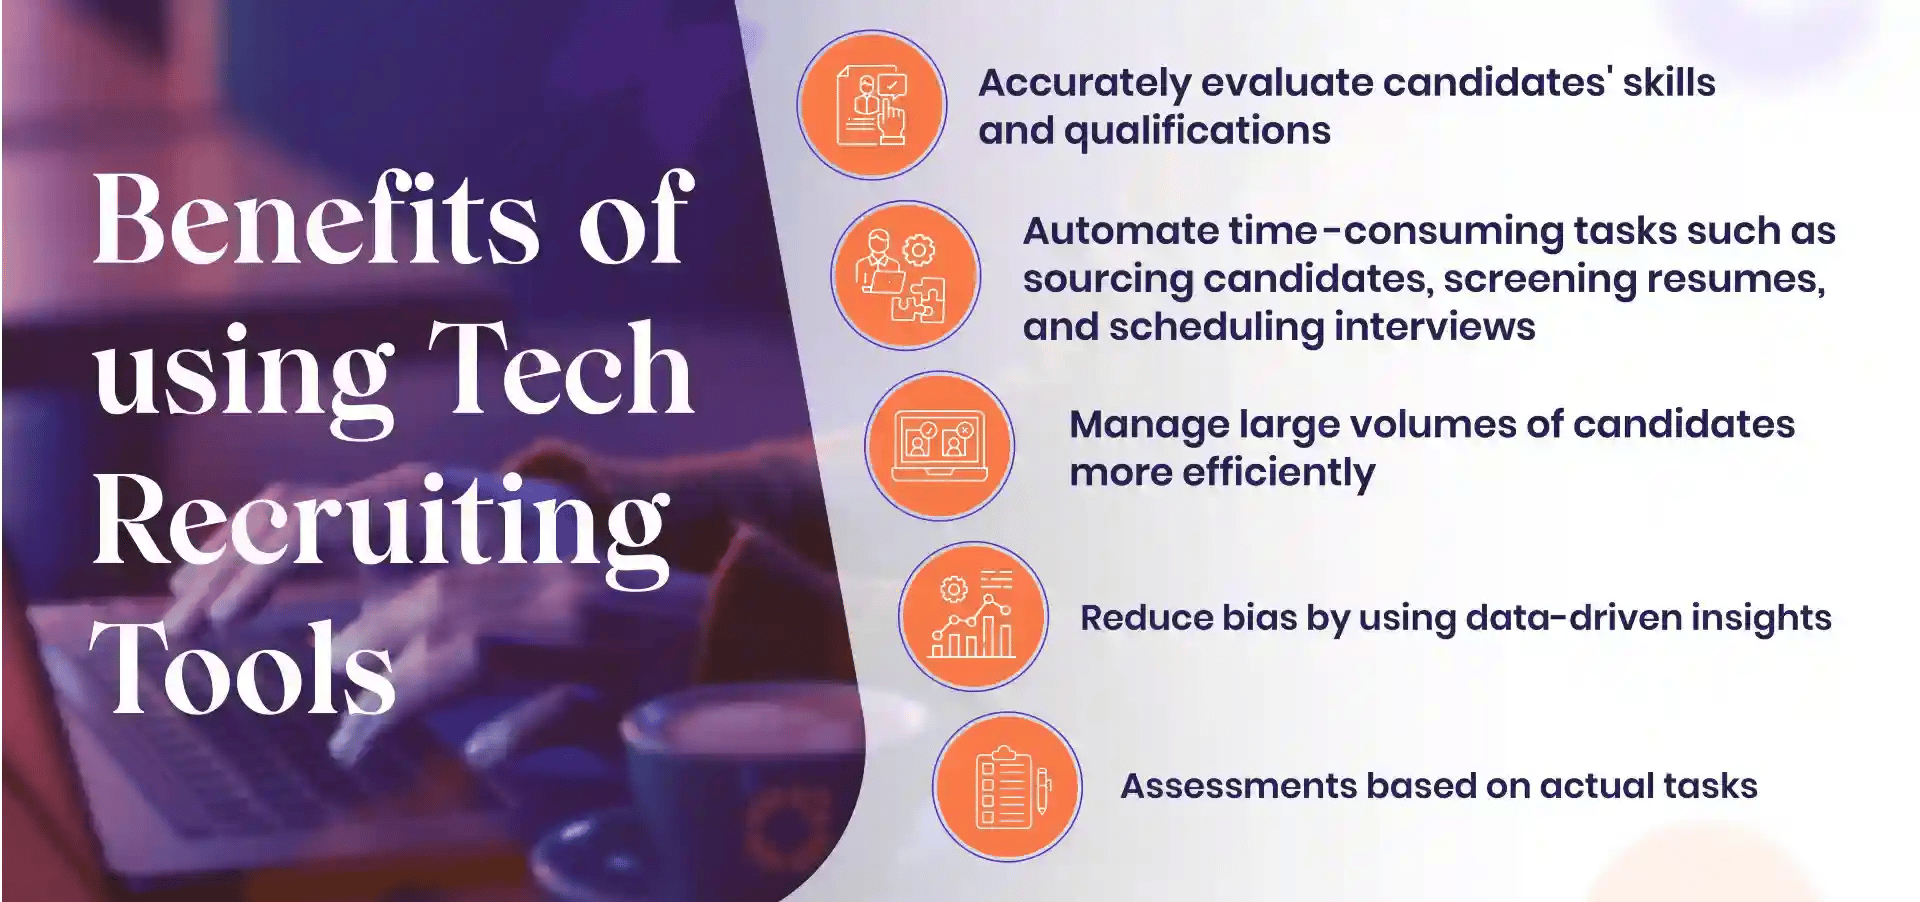 Benefits-of-using-tech-recruiting-tools